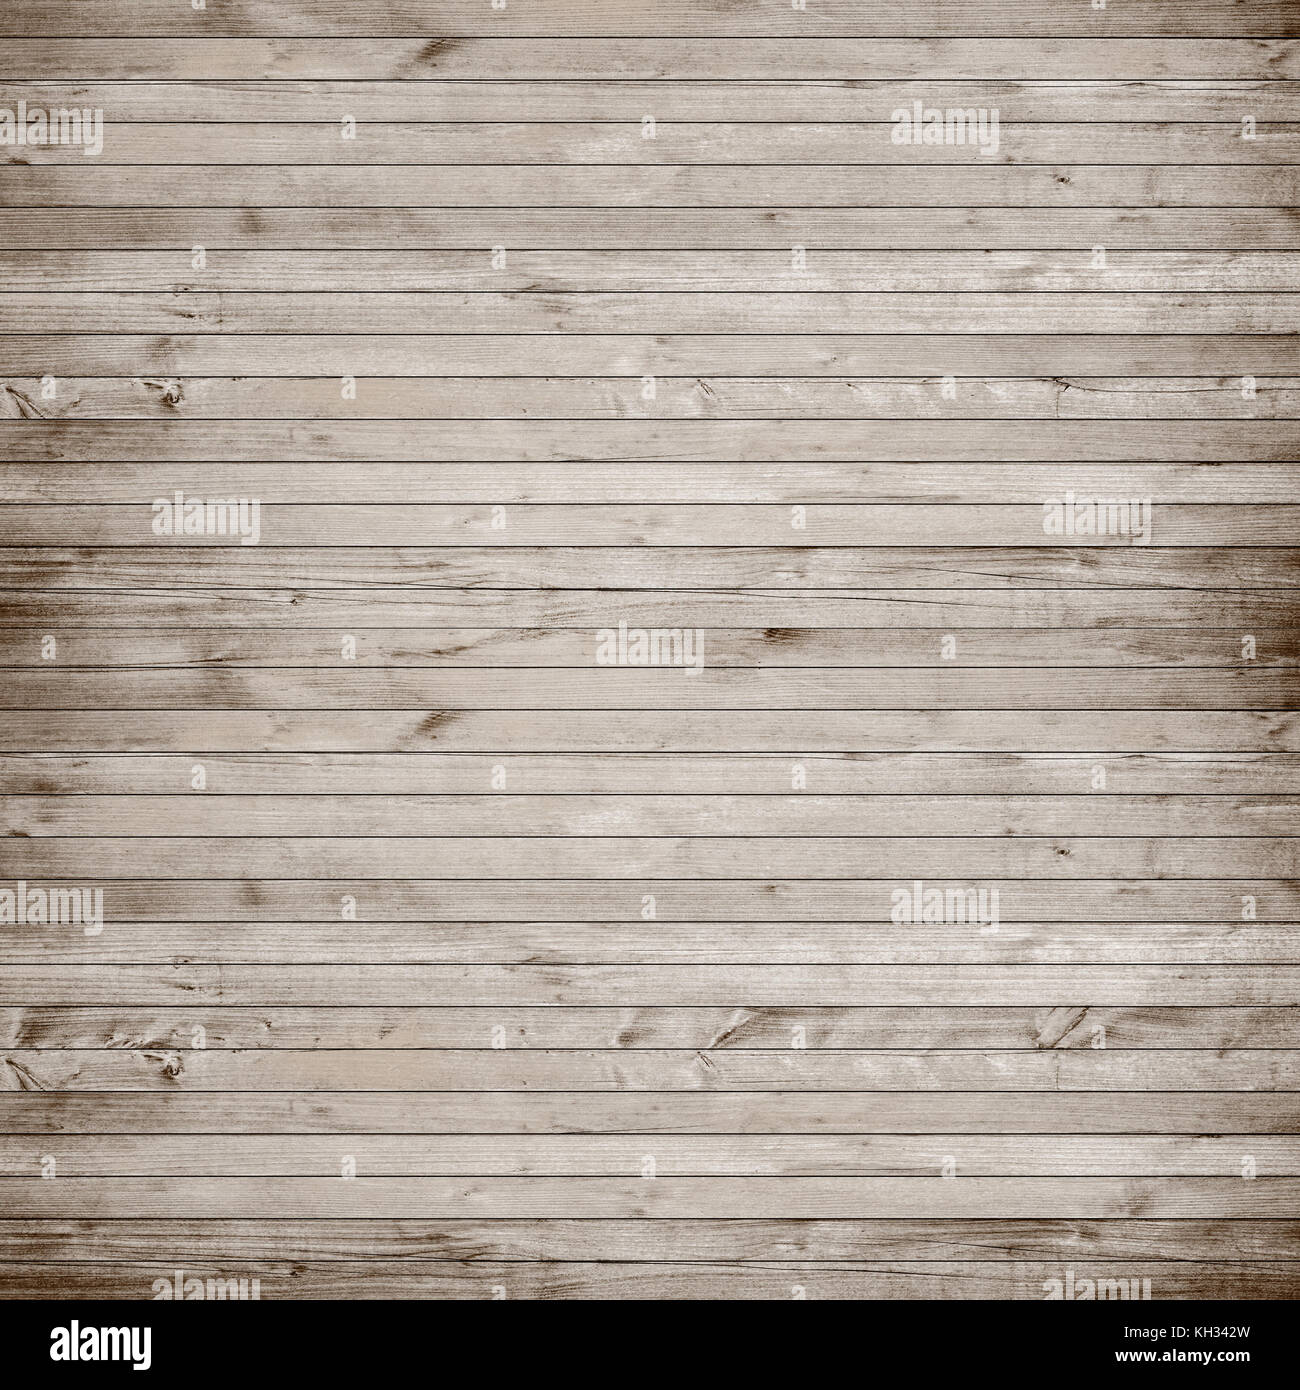 Old wooden parquet, table, or floor surface. Grunge wooden texture with horizontal planks. Stock Photo